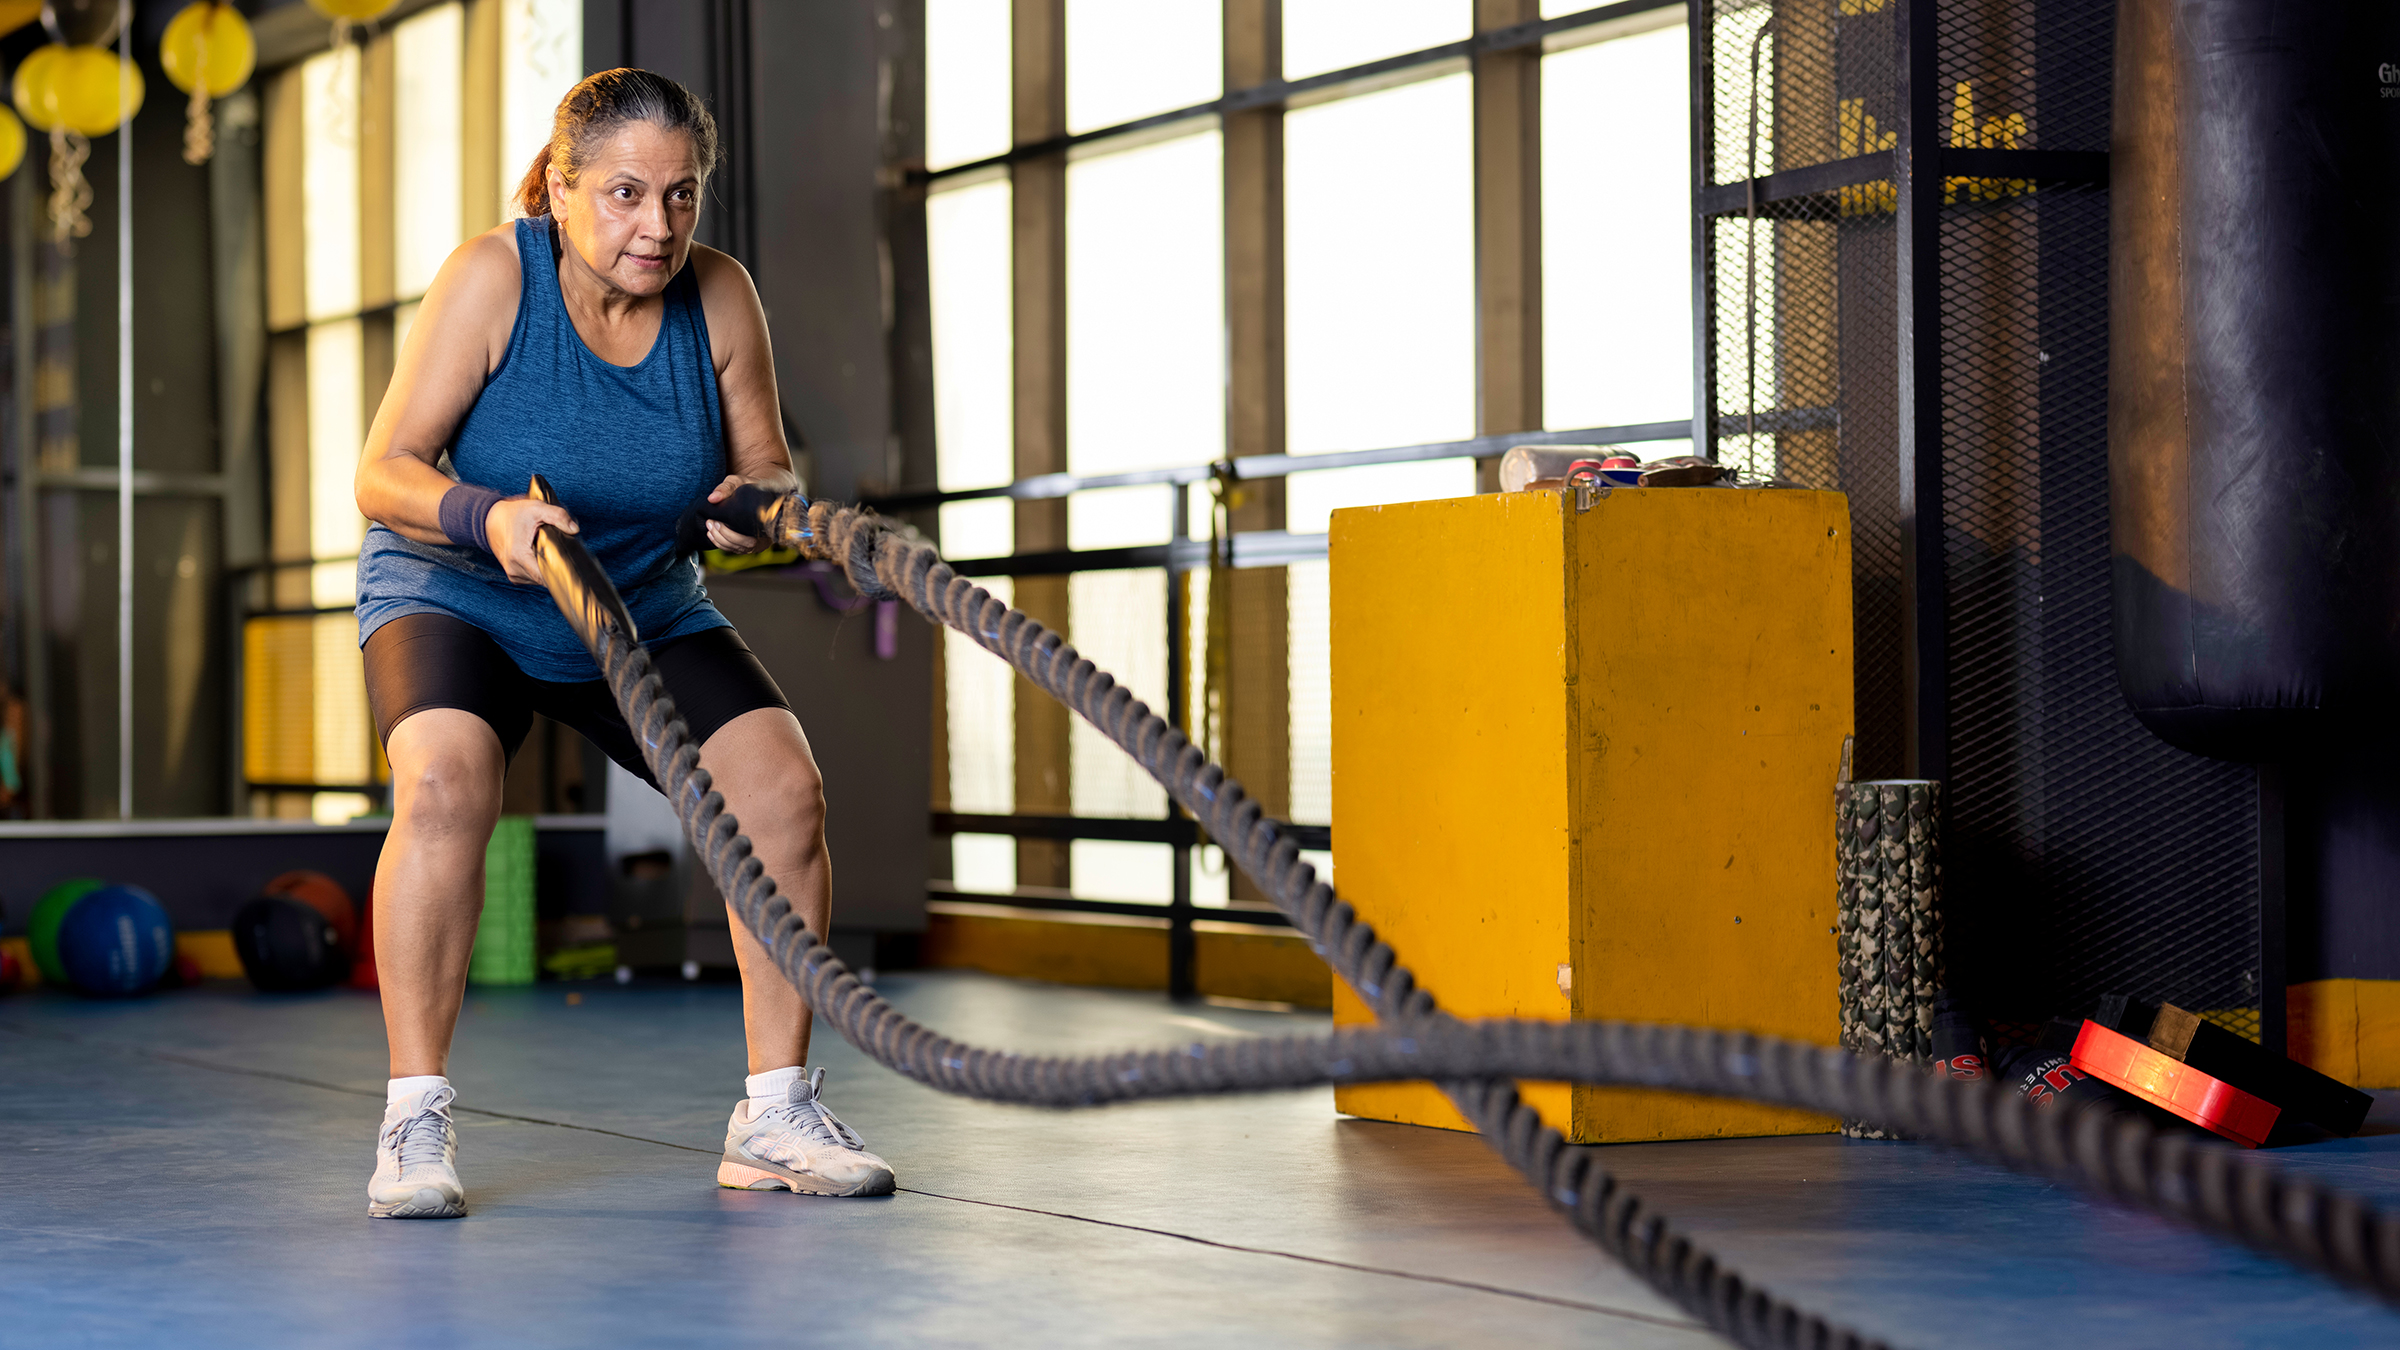 https://images.ctfassets.net/4f3rgqwzdznj/23FEGhbRWFOwhYcsYAwJ9h/03c09b588a8be98906393066ee6f5db8/woman_exercise_with_battle_ropes_1427221511.jpg